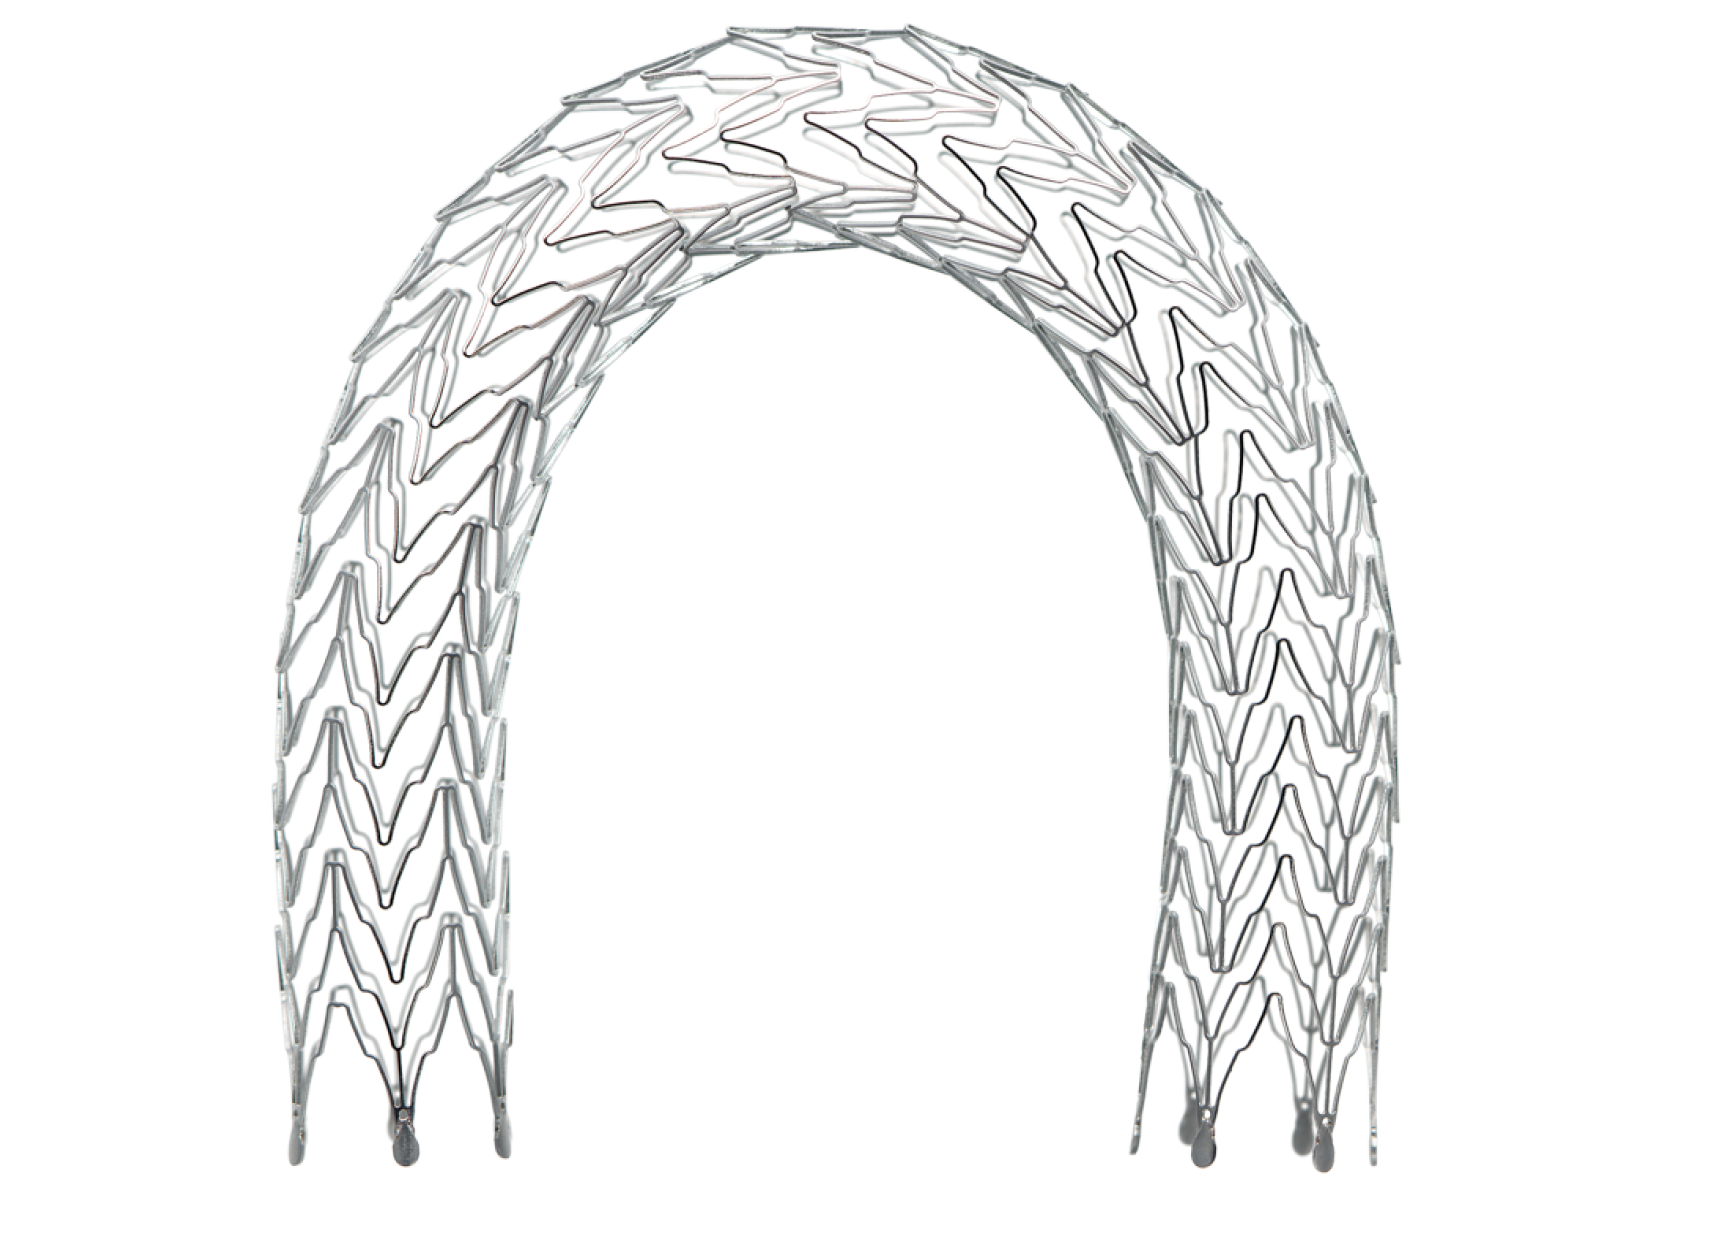 Absolute Pro Vascular Self-Expanding Stent System Design